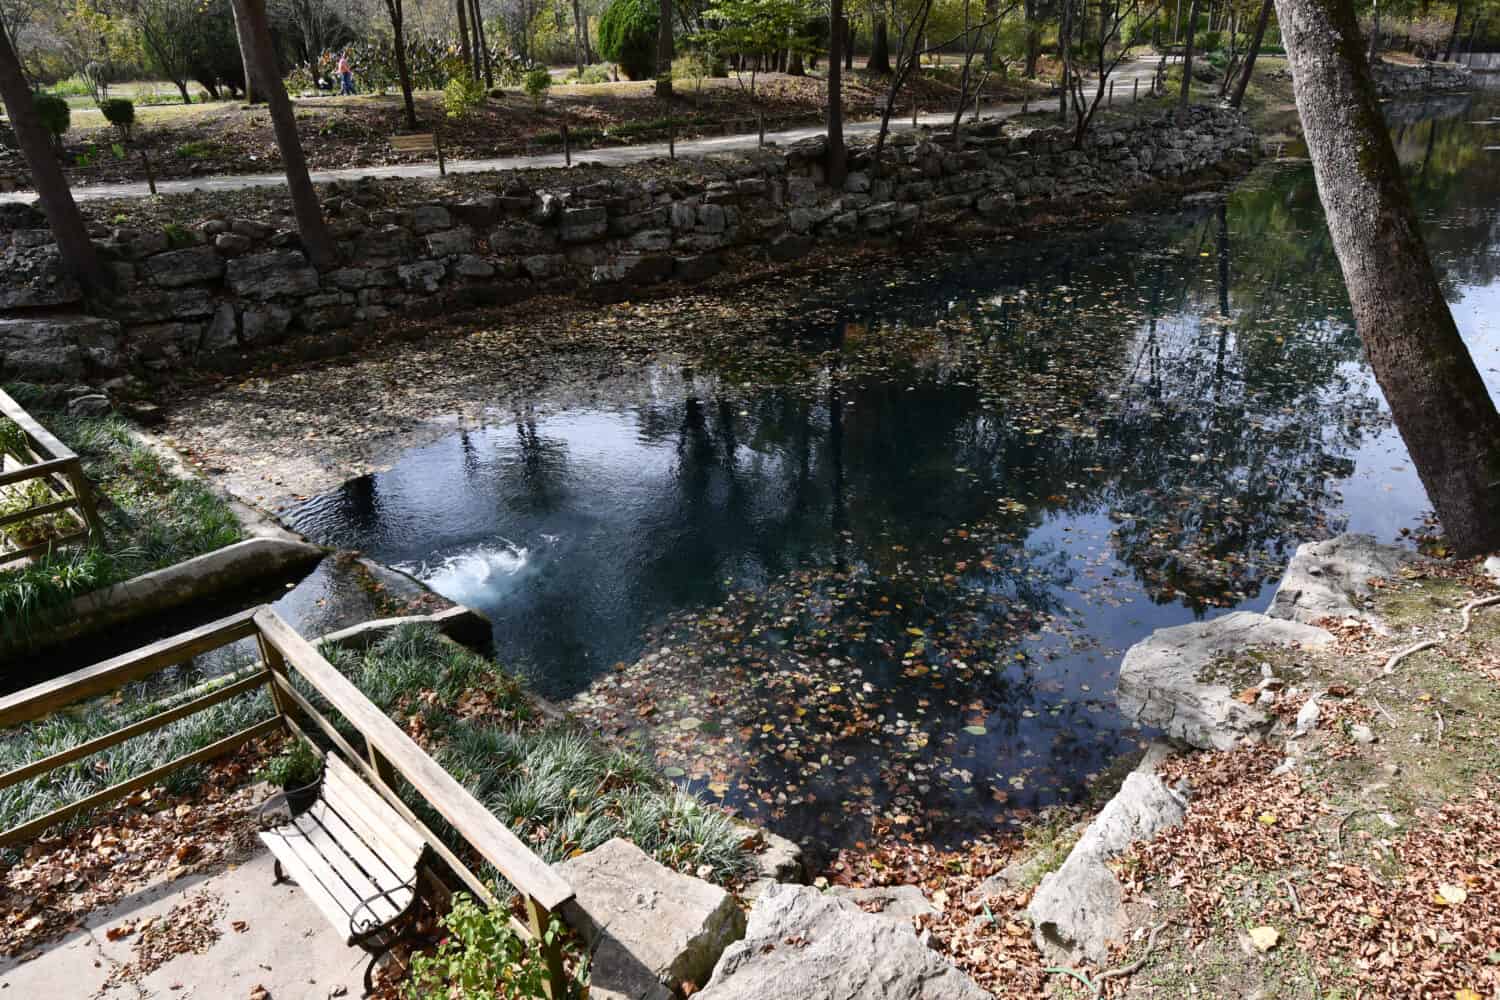 The water at the Blue Spring Heritage Center in Eureka Springs, Arkansas. Leaves have fallen into the water.